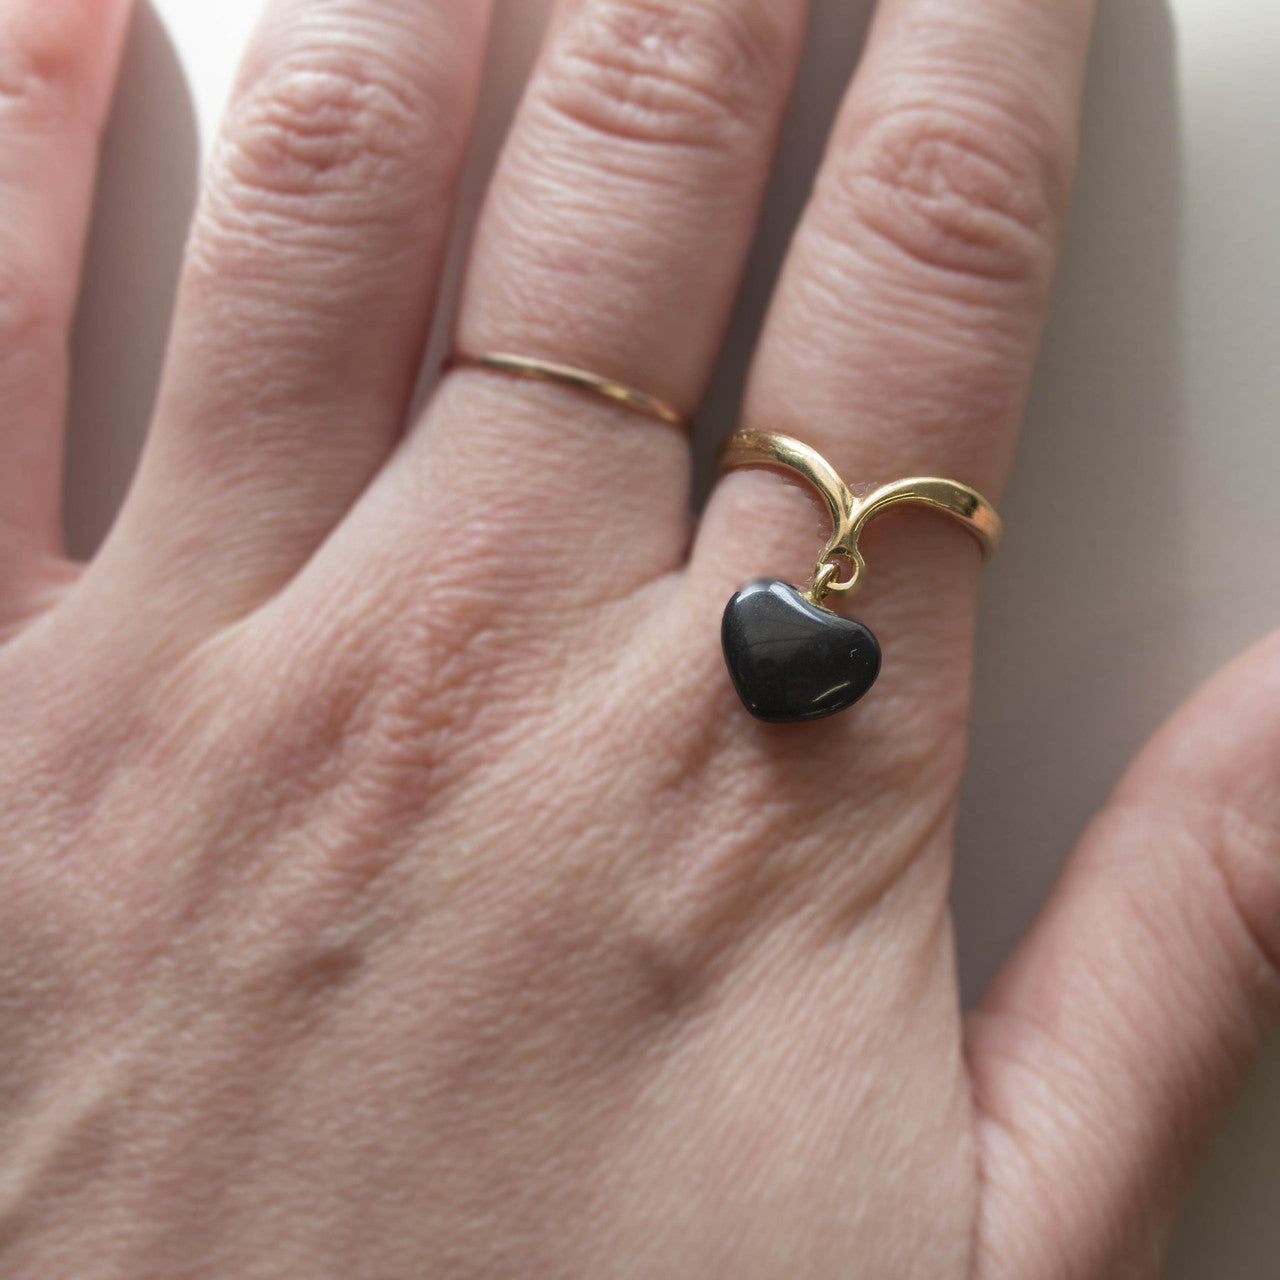 Vintage Ring Dangling Heart Shaped Onyx Stone Ring 18k Yellow Gold Electroplated 1970s Size: 4